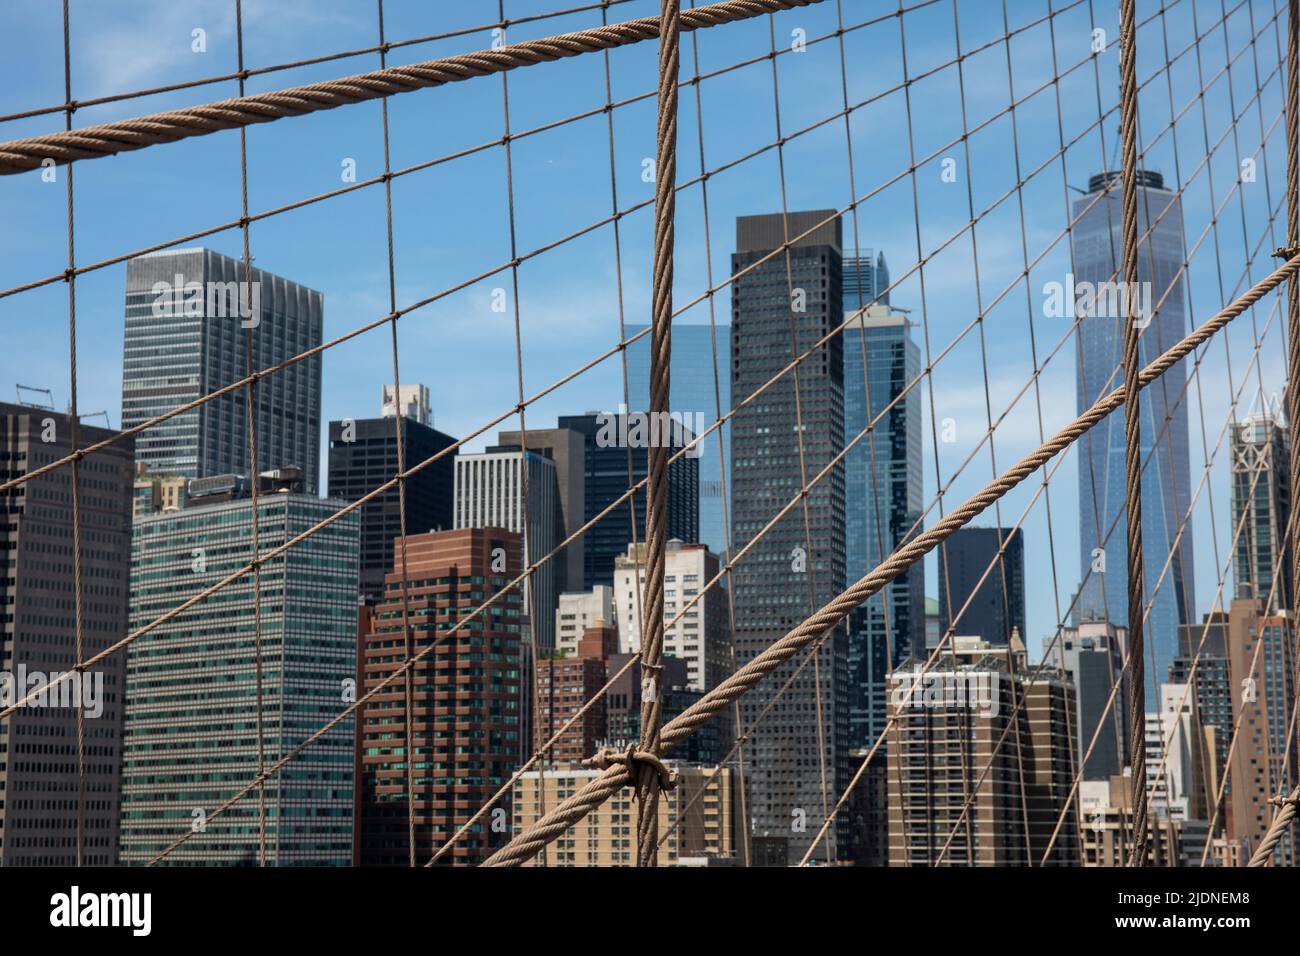 High-rise buildings of Lower Manhattan behind Brooklyn Bridge Pedestrian Walkway structual wires in New York City, United States of America Stock Photo